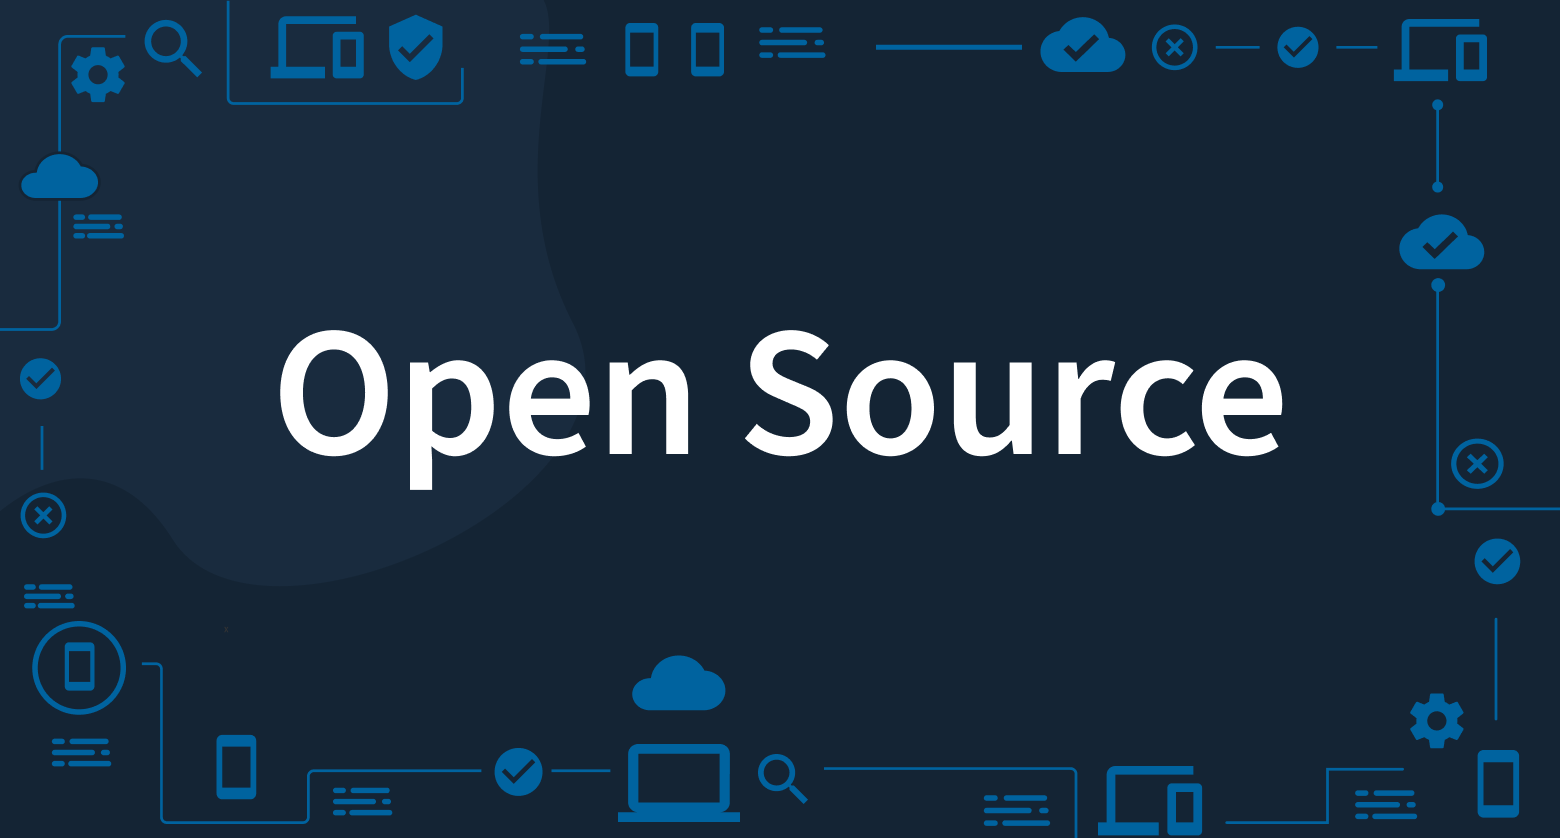 Cyber and Open Source: Some Helpful Thoughts